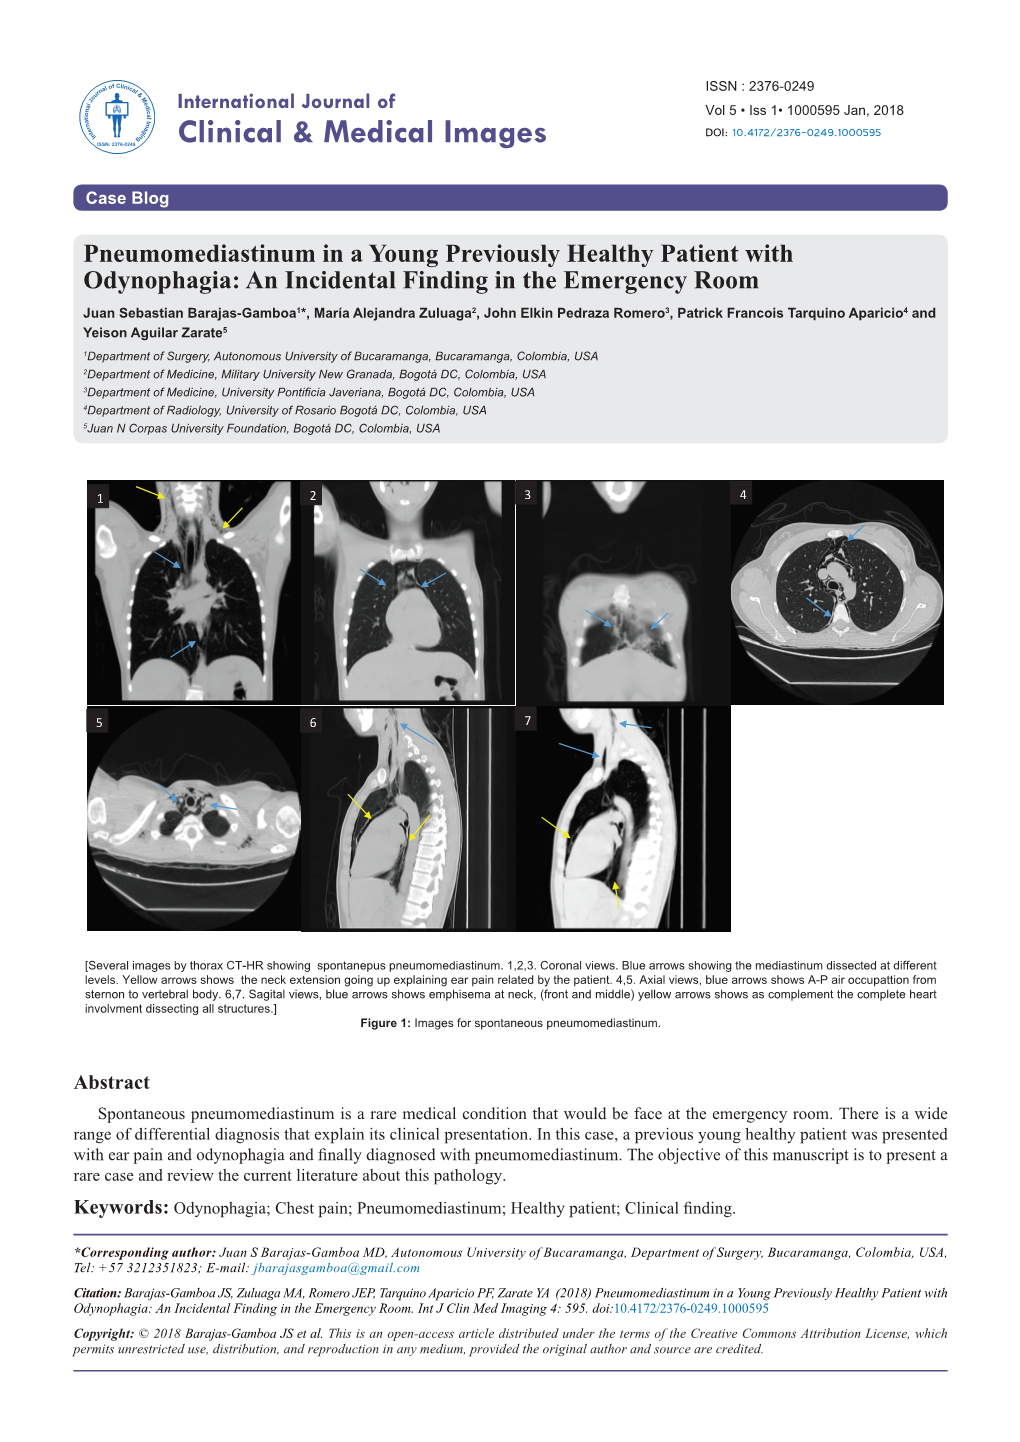 Pneumomediastinum in a Young Previously Healthy Patient with Odynophagia: an Incidental Finding in the Emergency Room